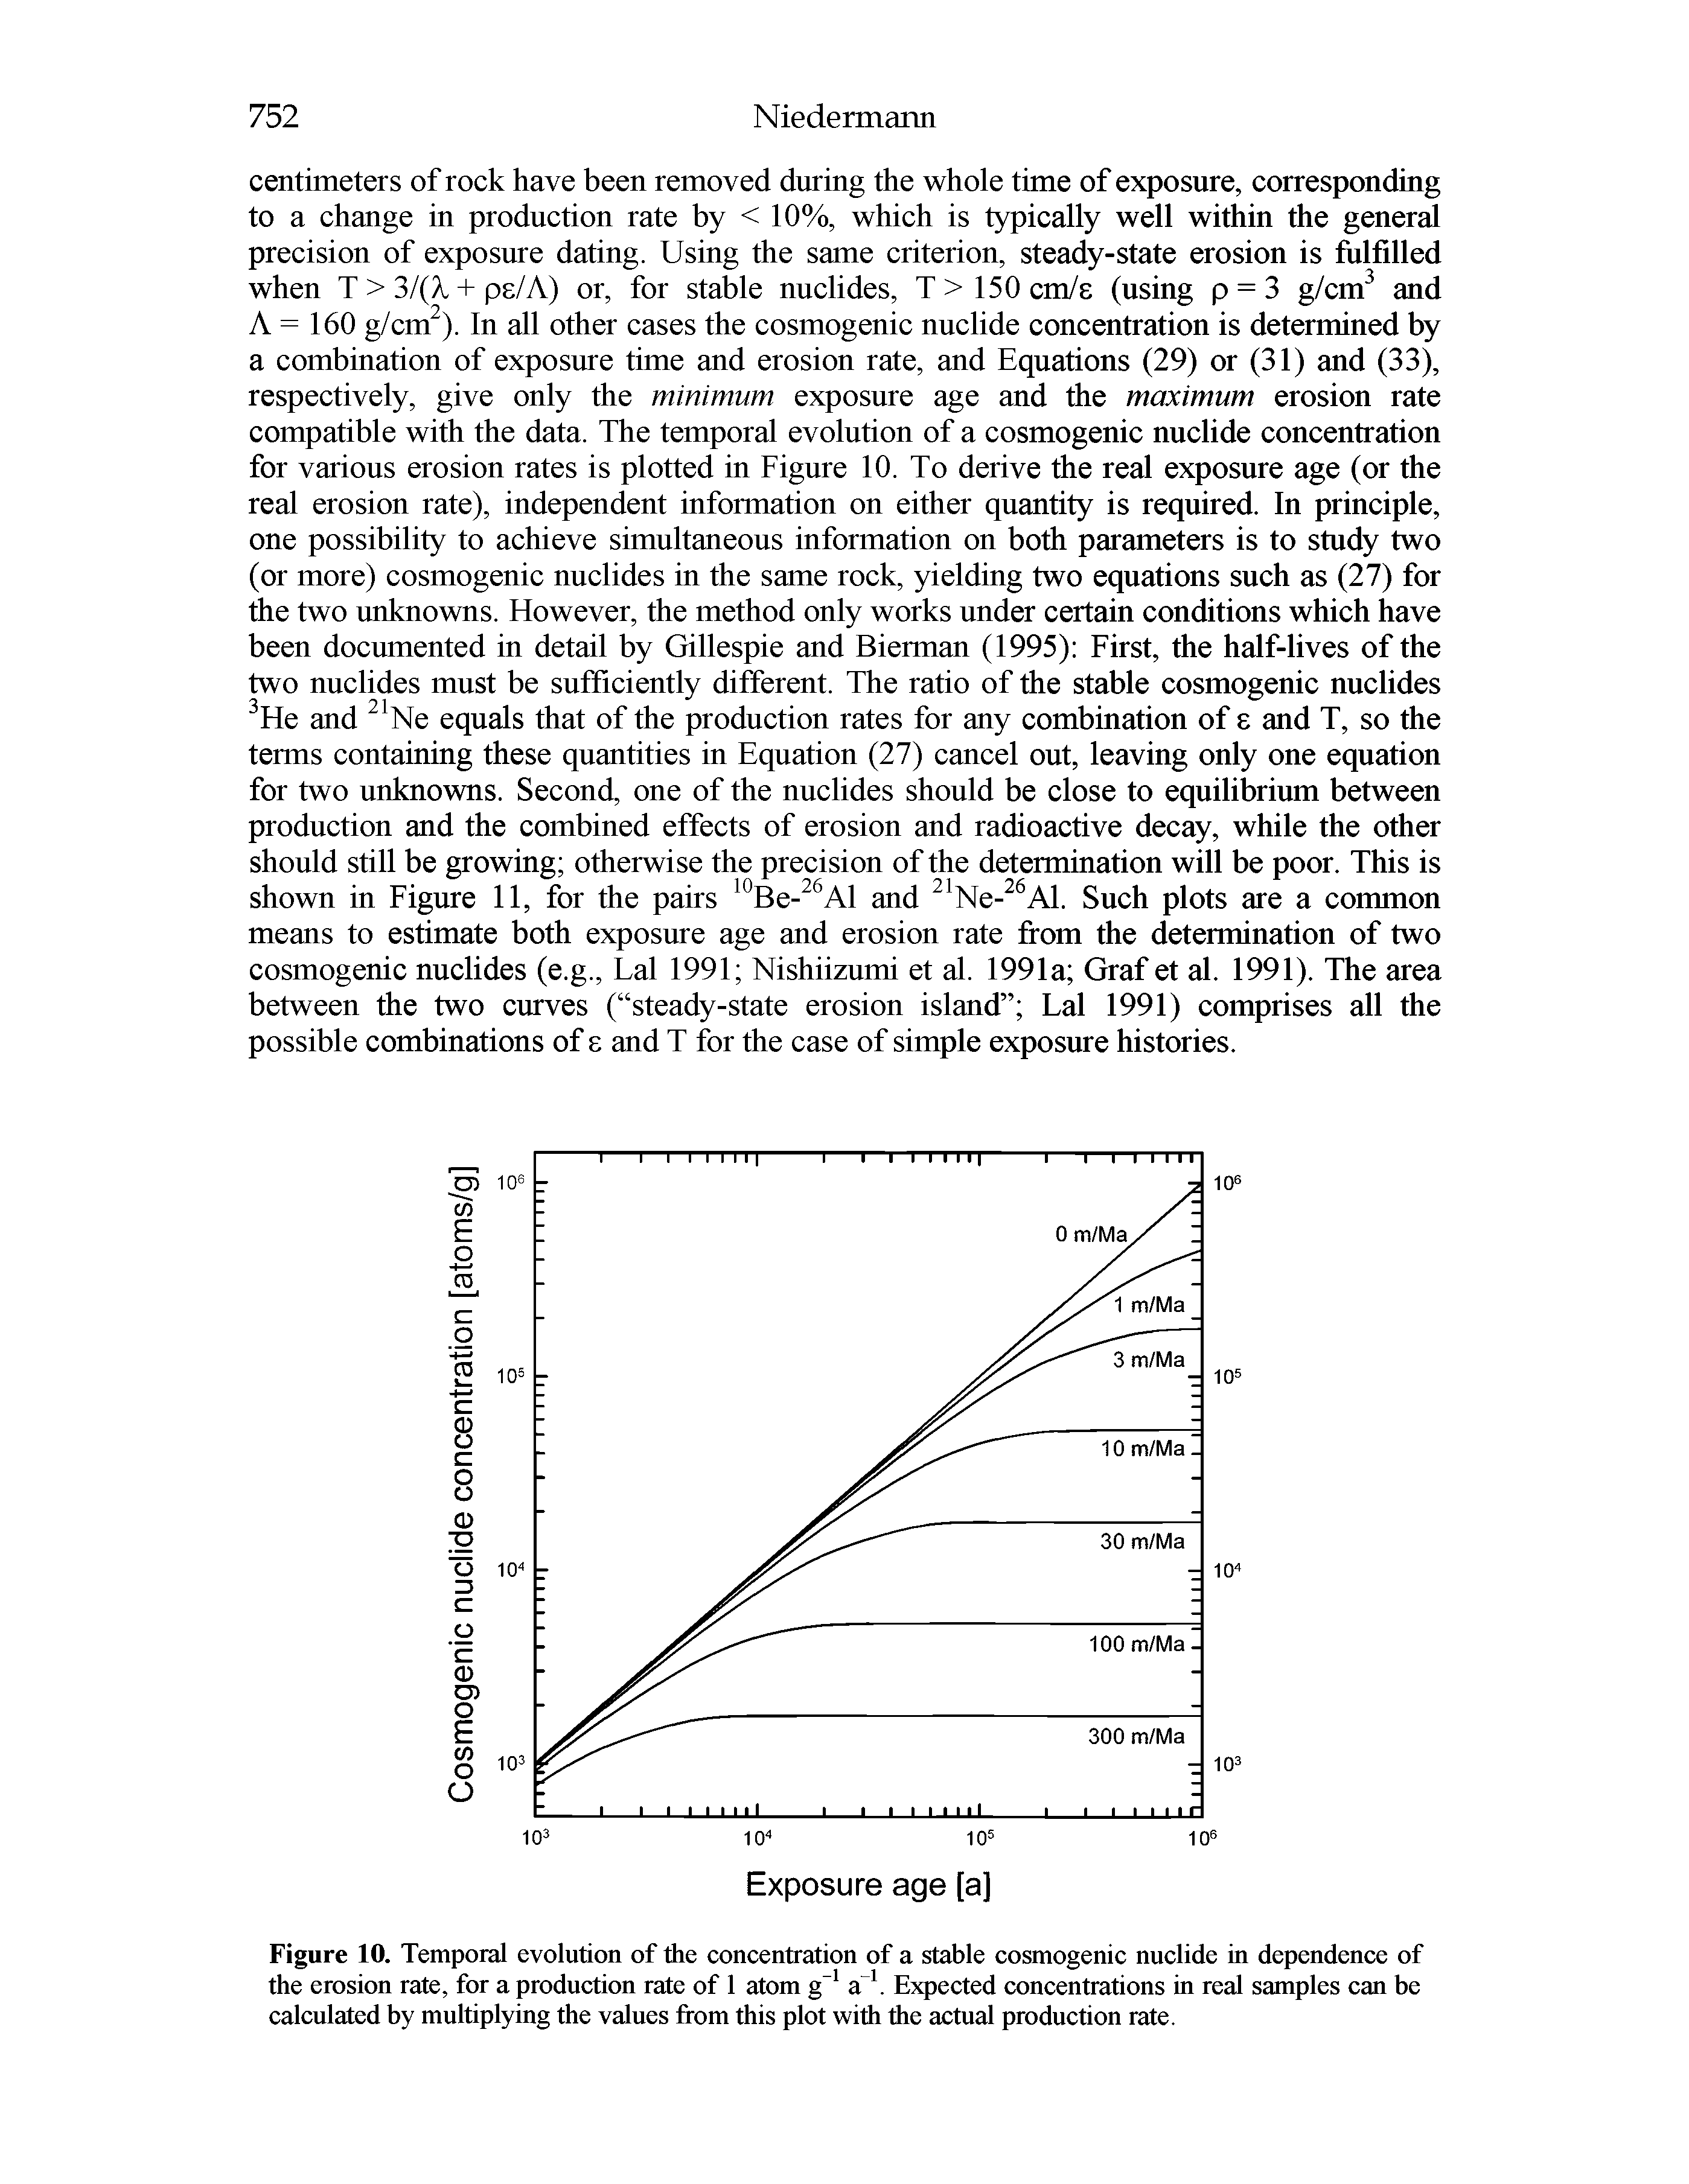 Figure 10. Temporal evolution of the concentration of a stable cosmogenic nuclide in dependence of the erosion rate, for a production rate of 1 atom g a f Expected concentrations in real samples can be calculated by multiplying the values from this plot with the actual production rate.